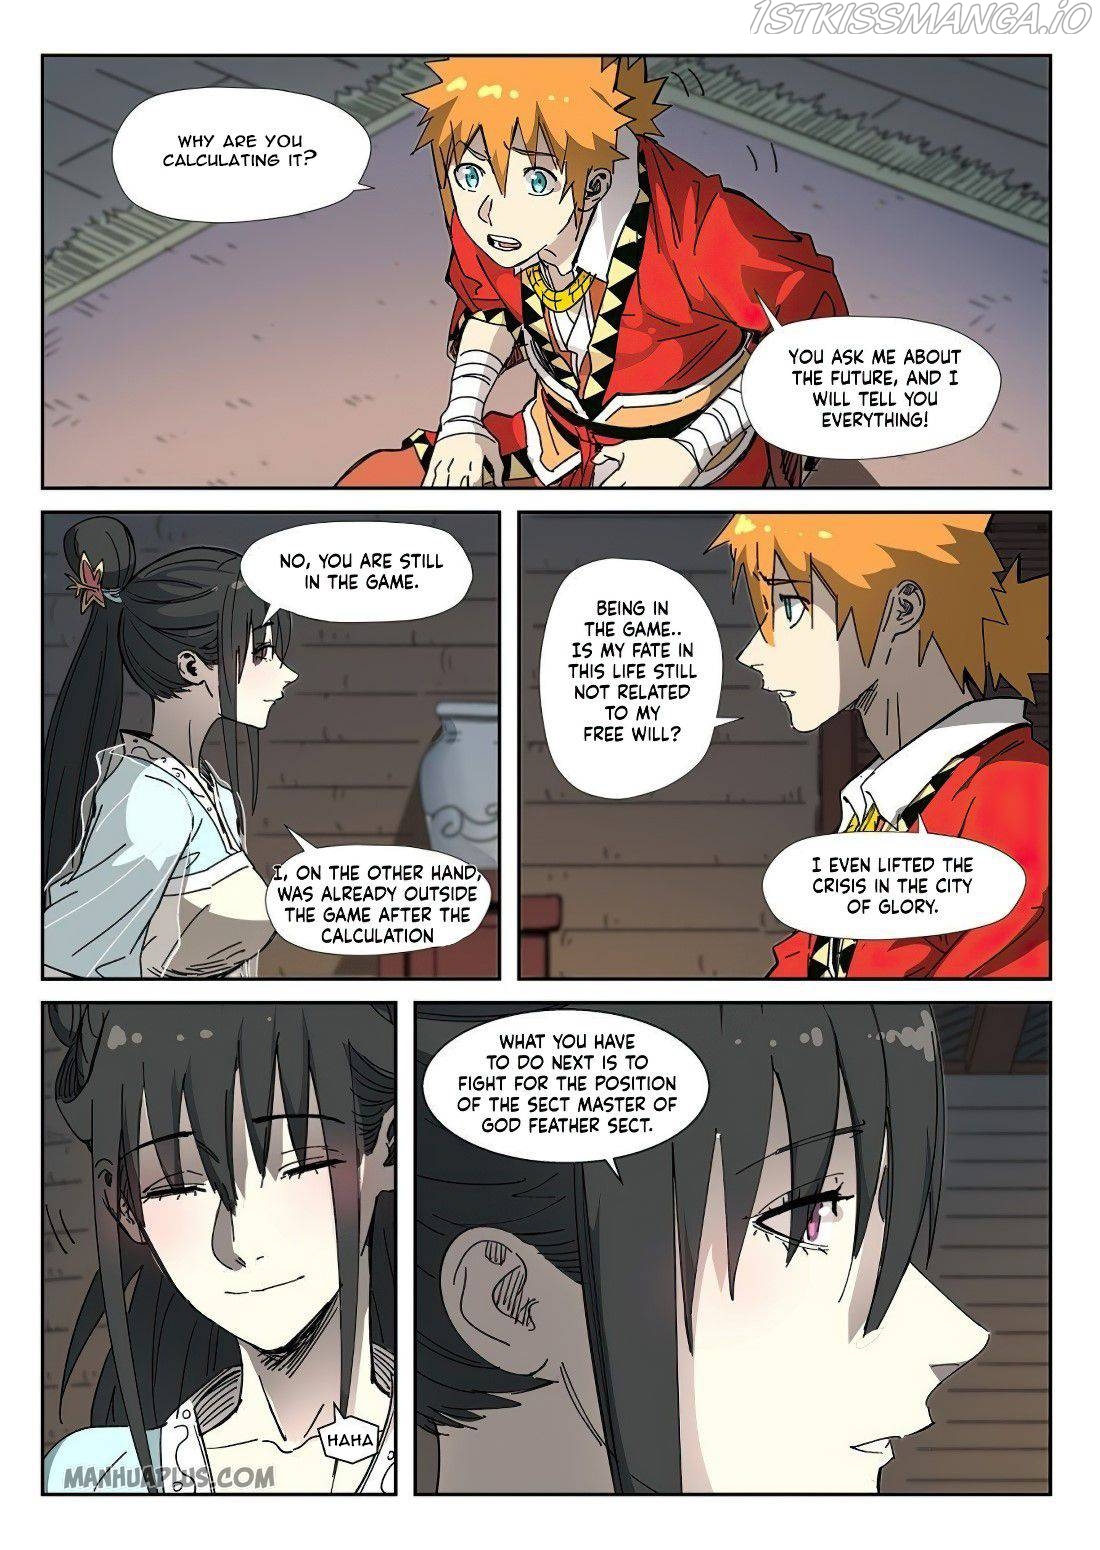 Tales of Demons and Gods Manhua Chapter 329.5 - Page 3